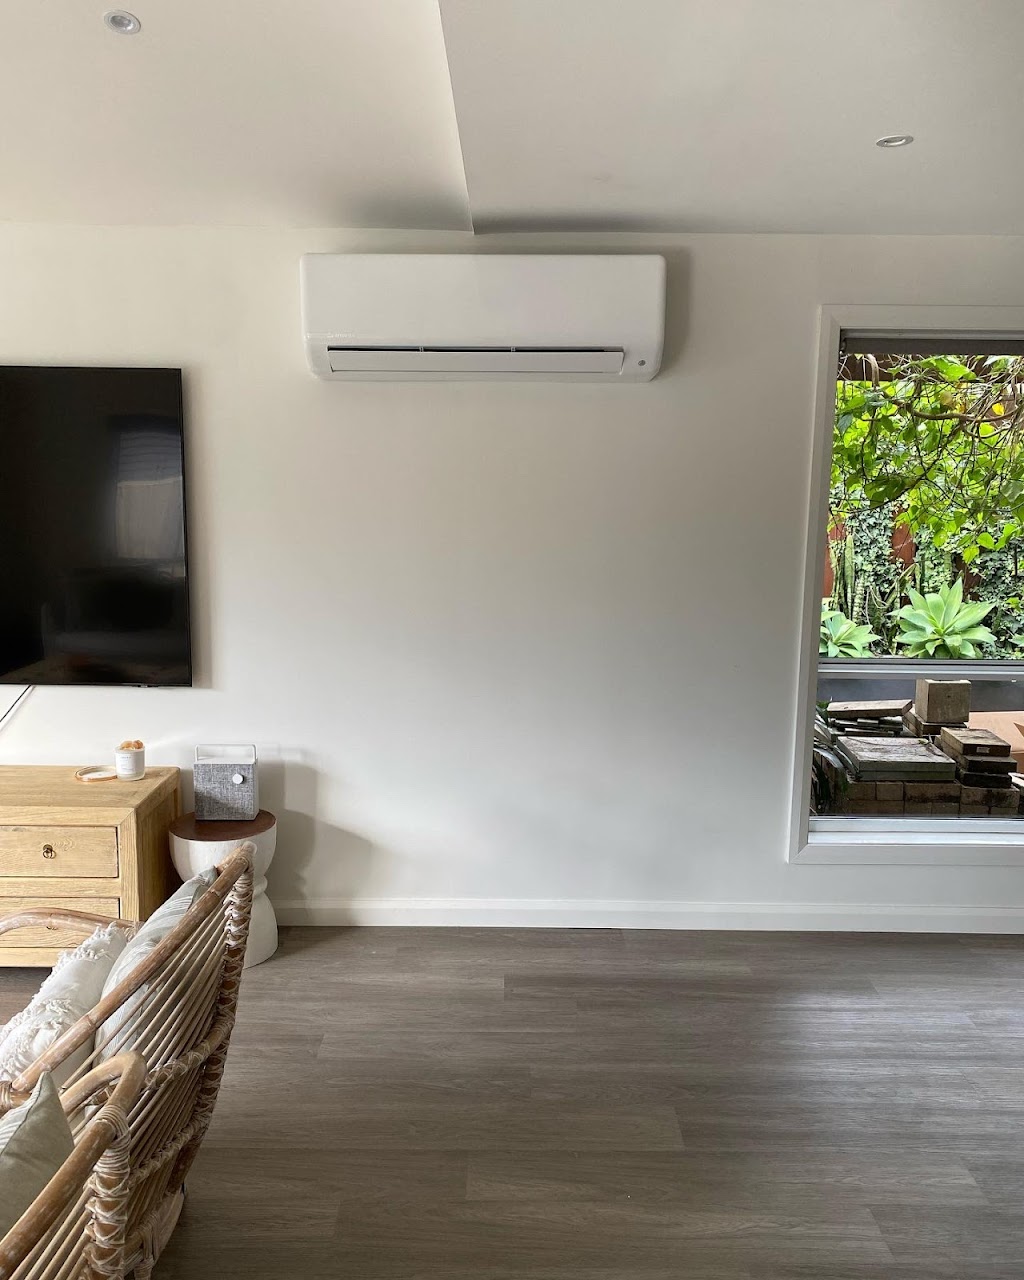 Lake and Valley Air Conditioning | store | 225 Cams Blvd, Summerland Point NSW 2259, Australia | 0447168717 OR +61 447 168 717